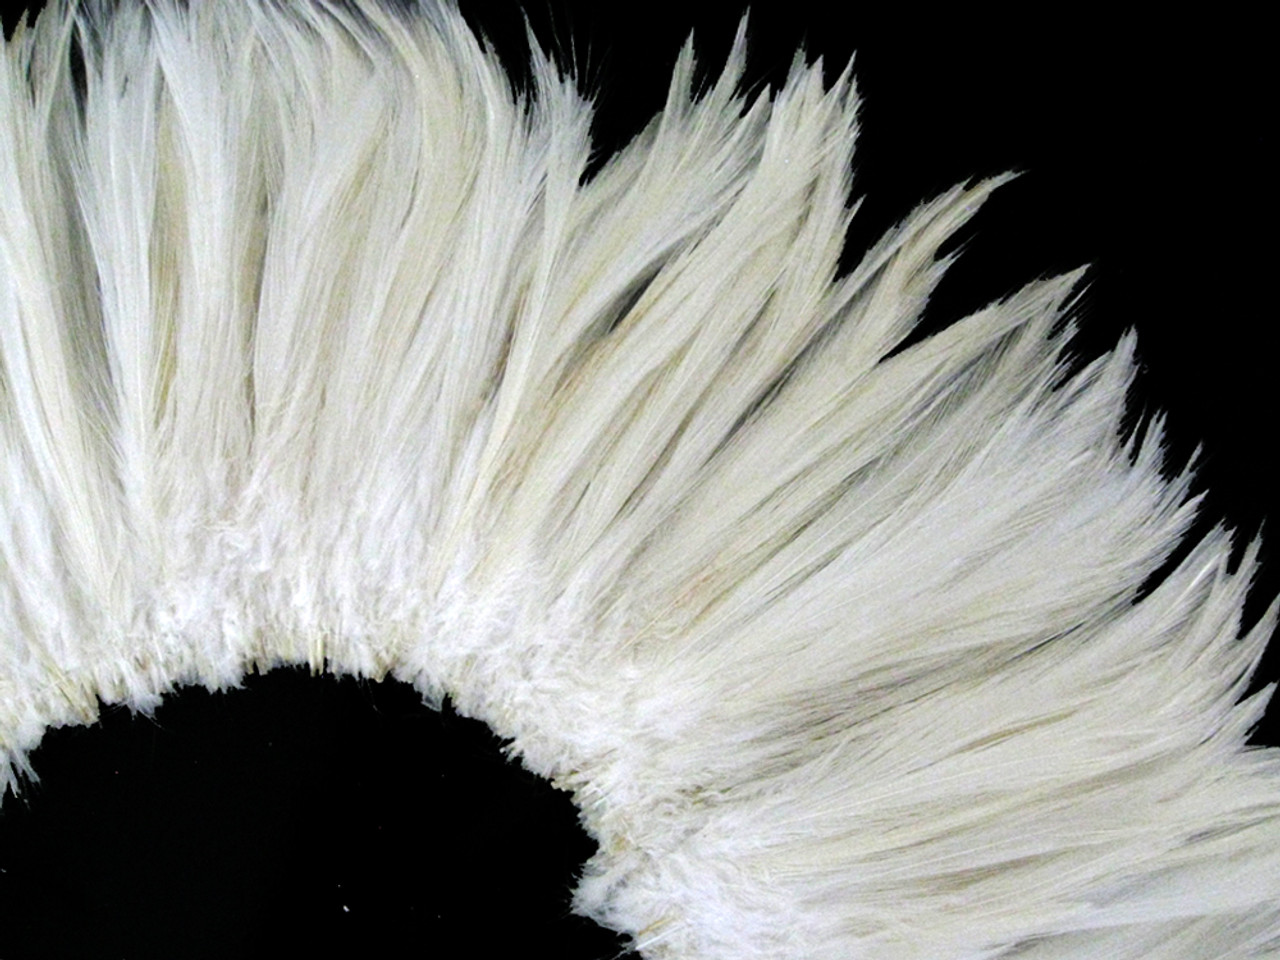 4 Inch Strip 6-7 Natural White Strung Rooster Neck Hackle Feathers